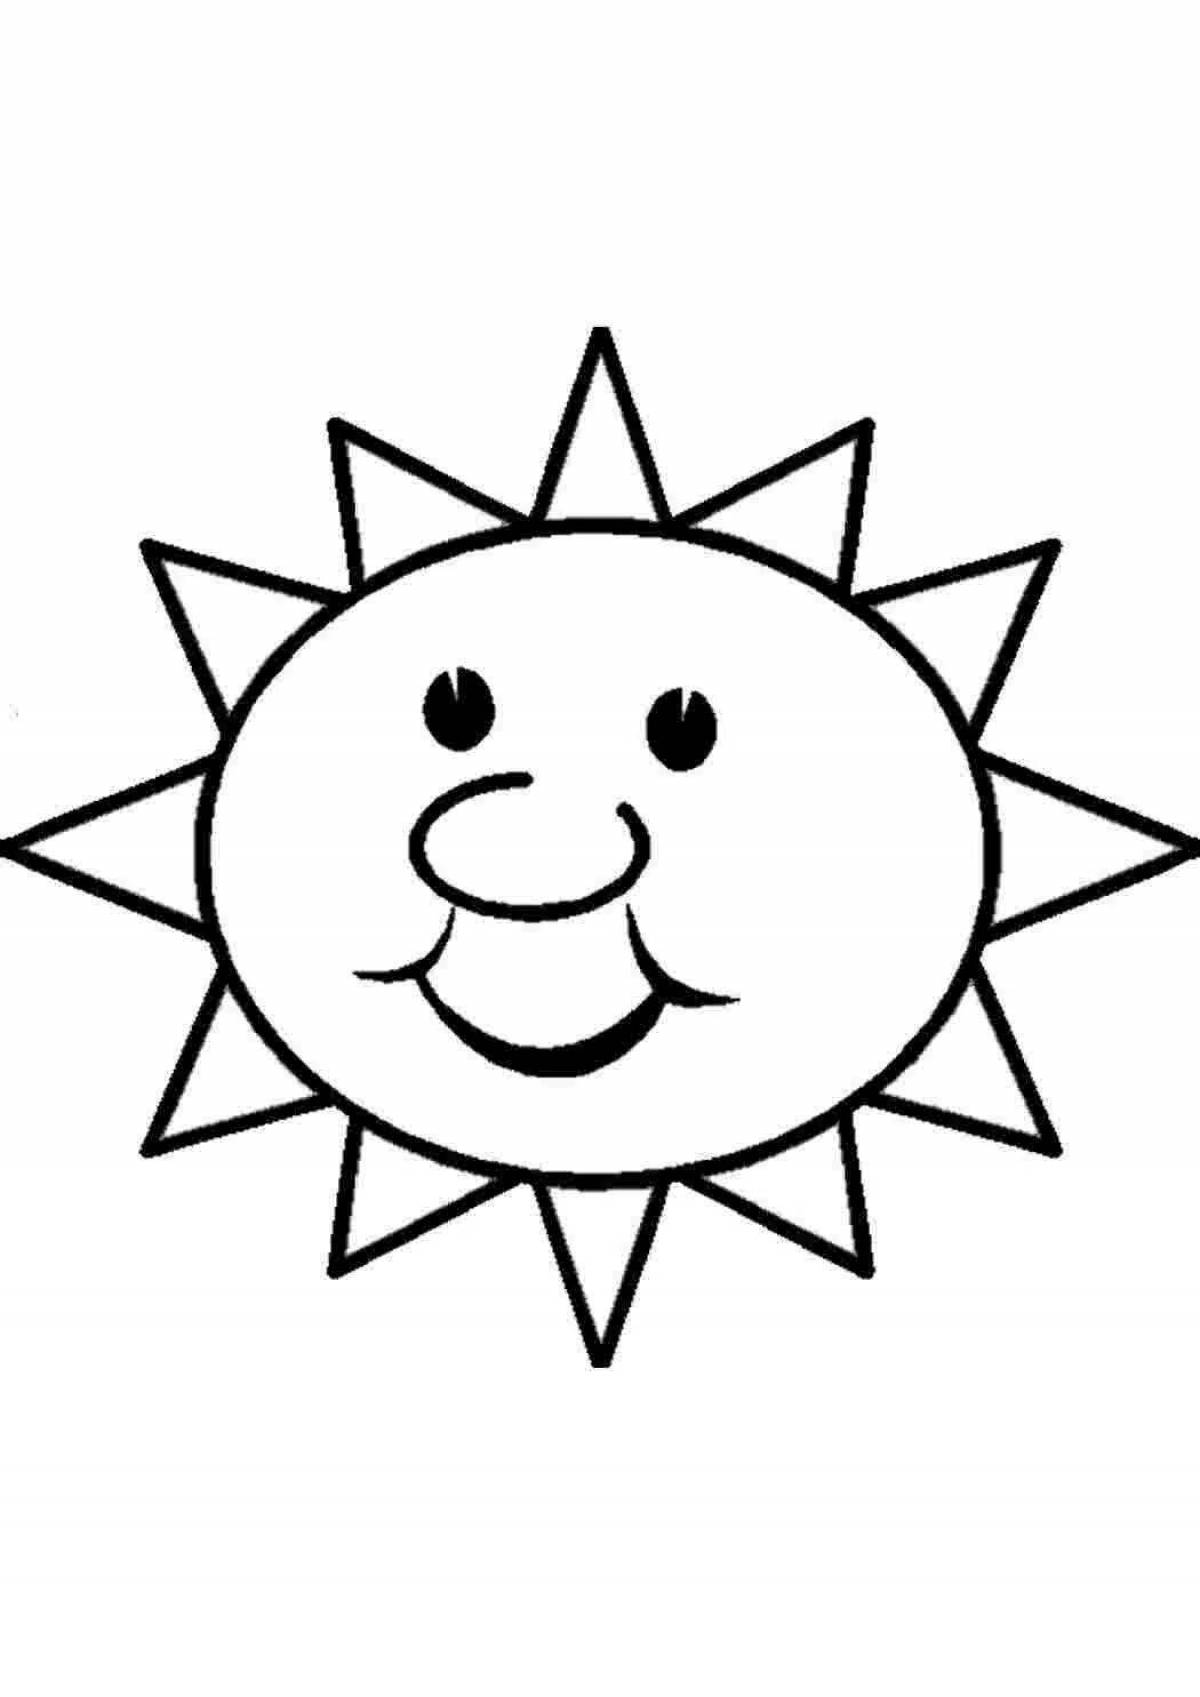 Inspirational sun coloring for kids